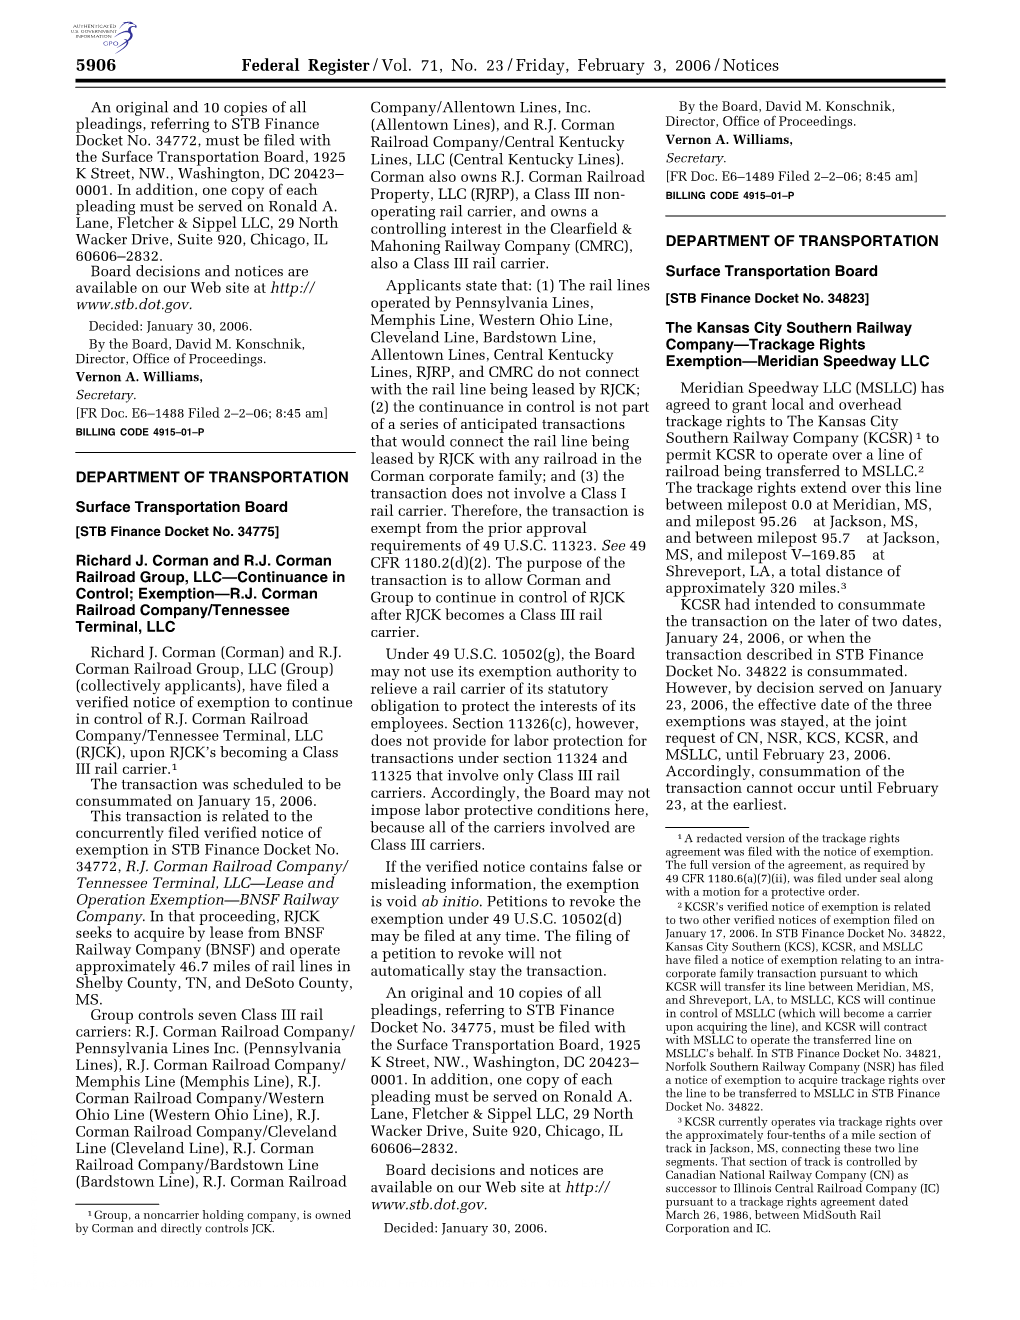 Federal Register/Vol. 71, No. 23/Friday, February 3, 2006/Notices